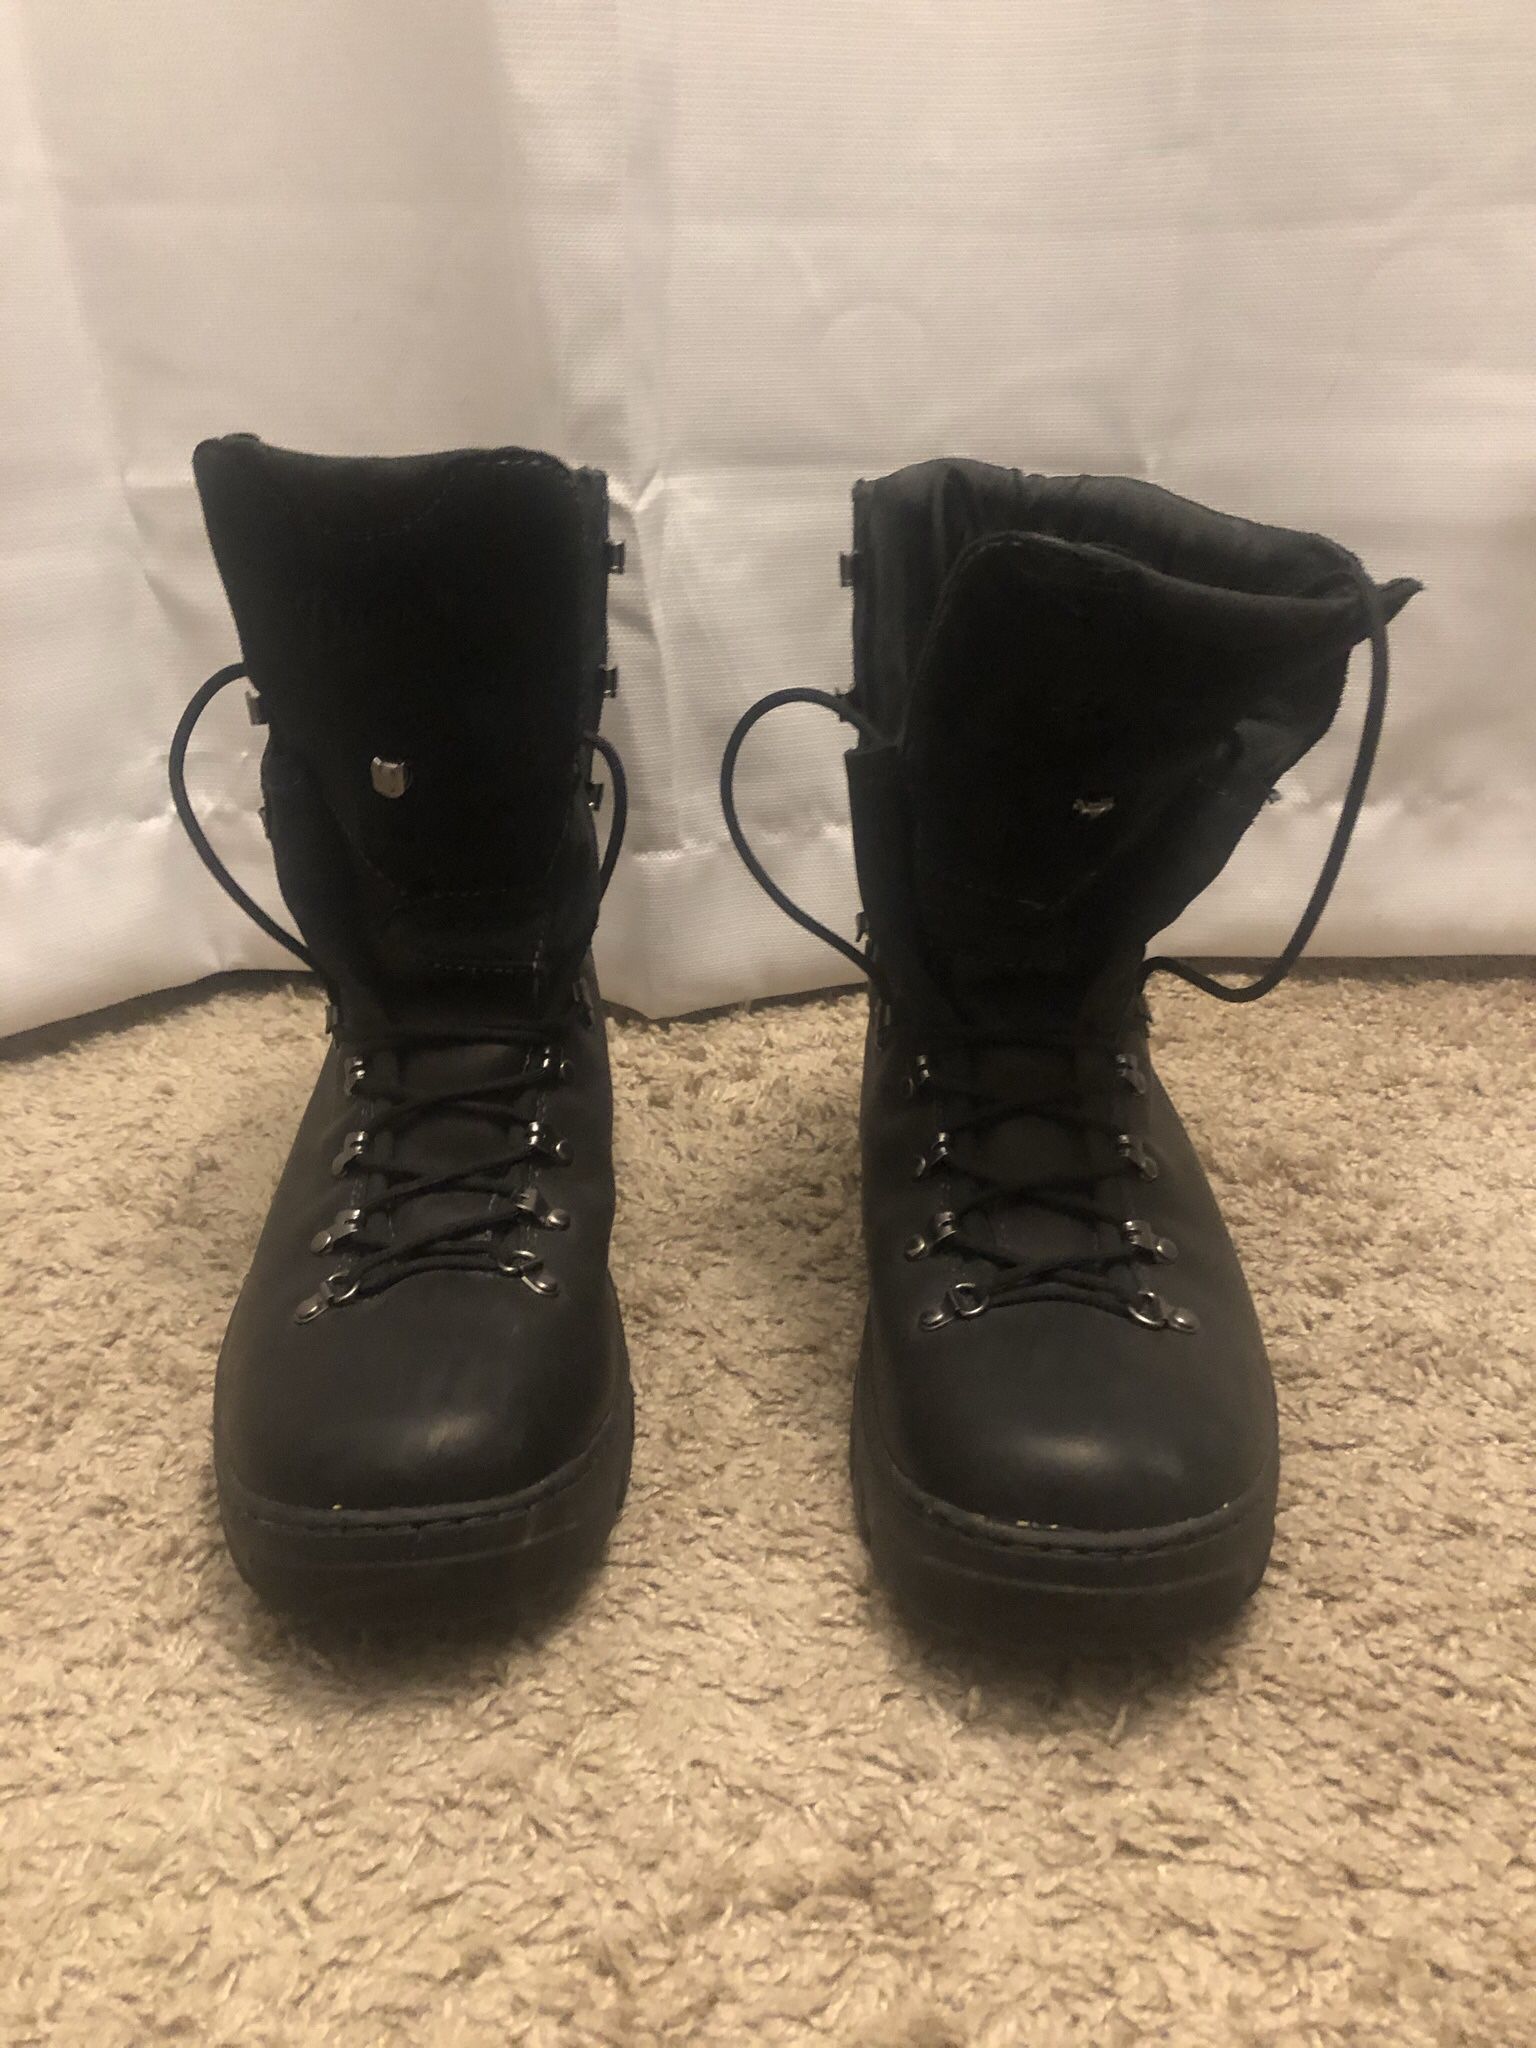 Tactical firefighter Boots